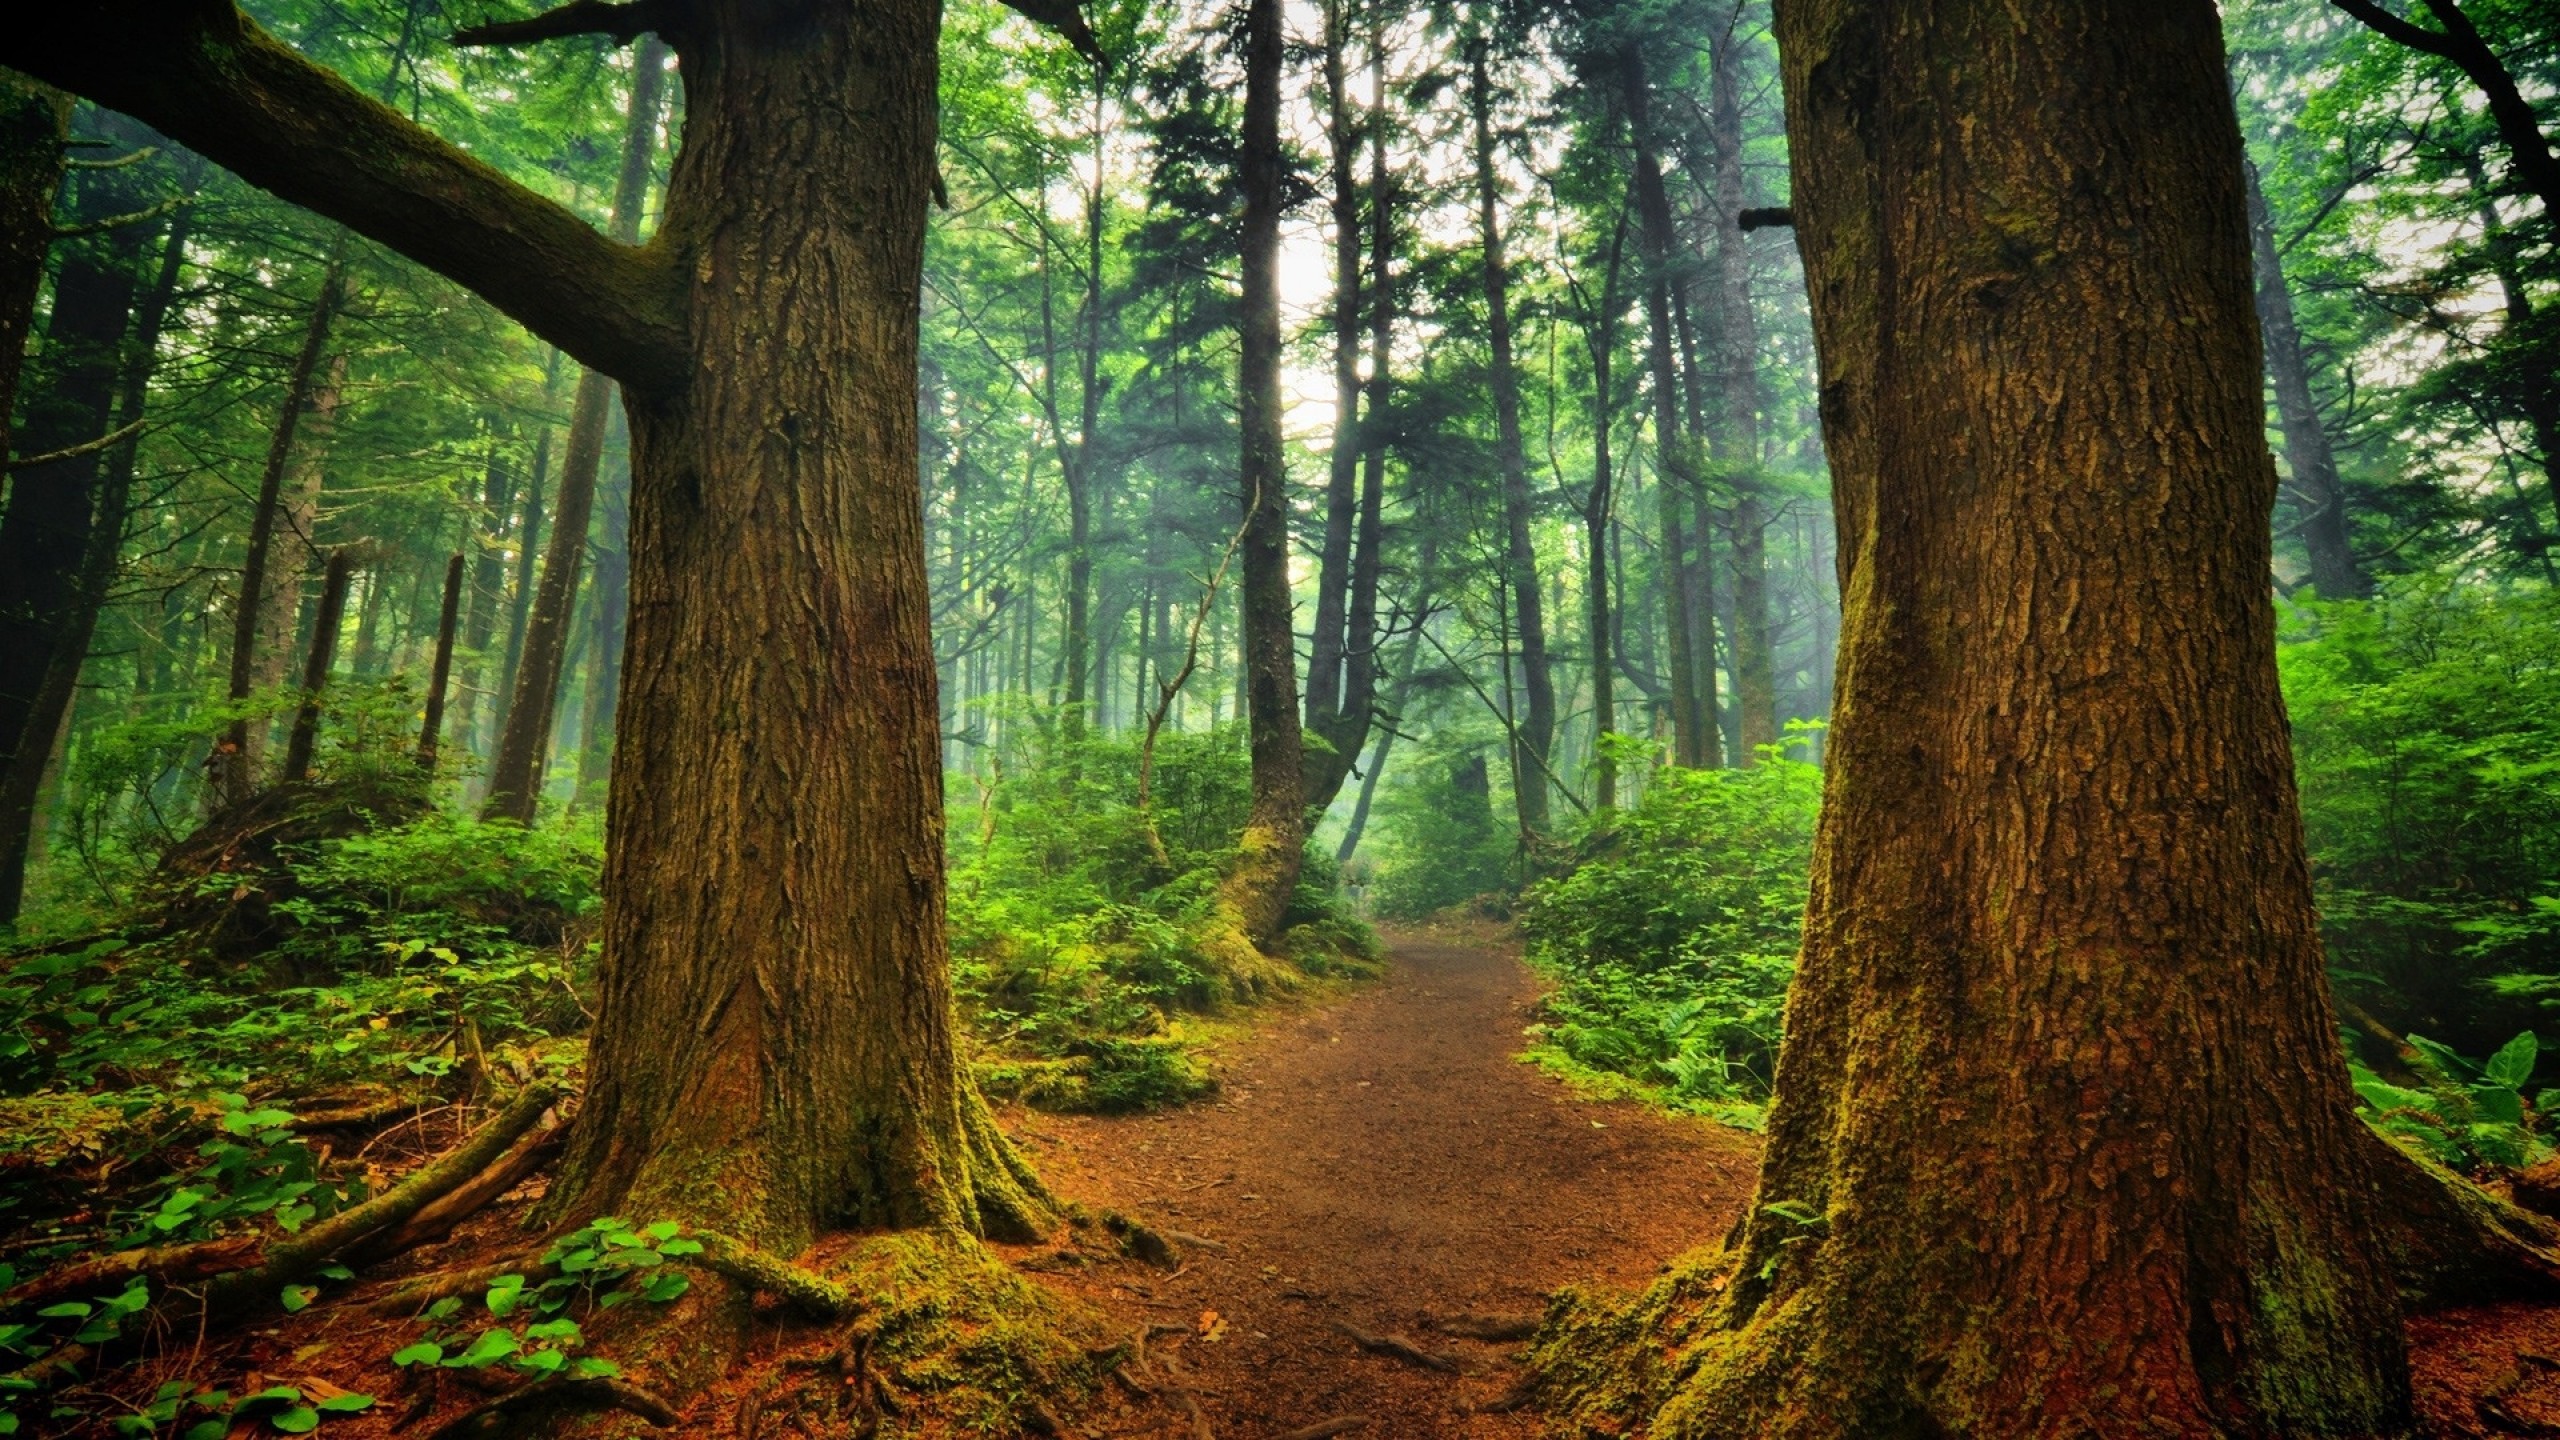 Nature___Forest_____The_path_among_the_trees_082620_